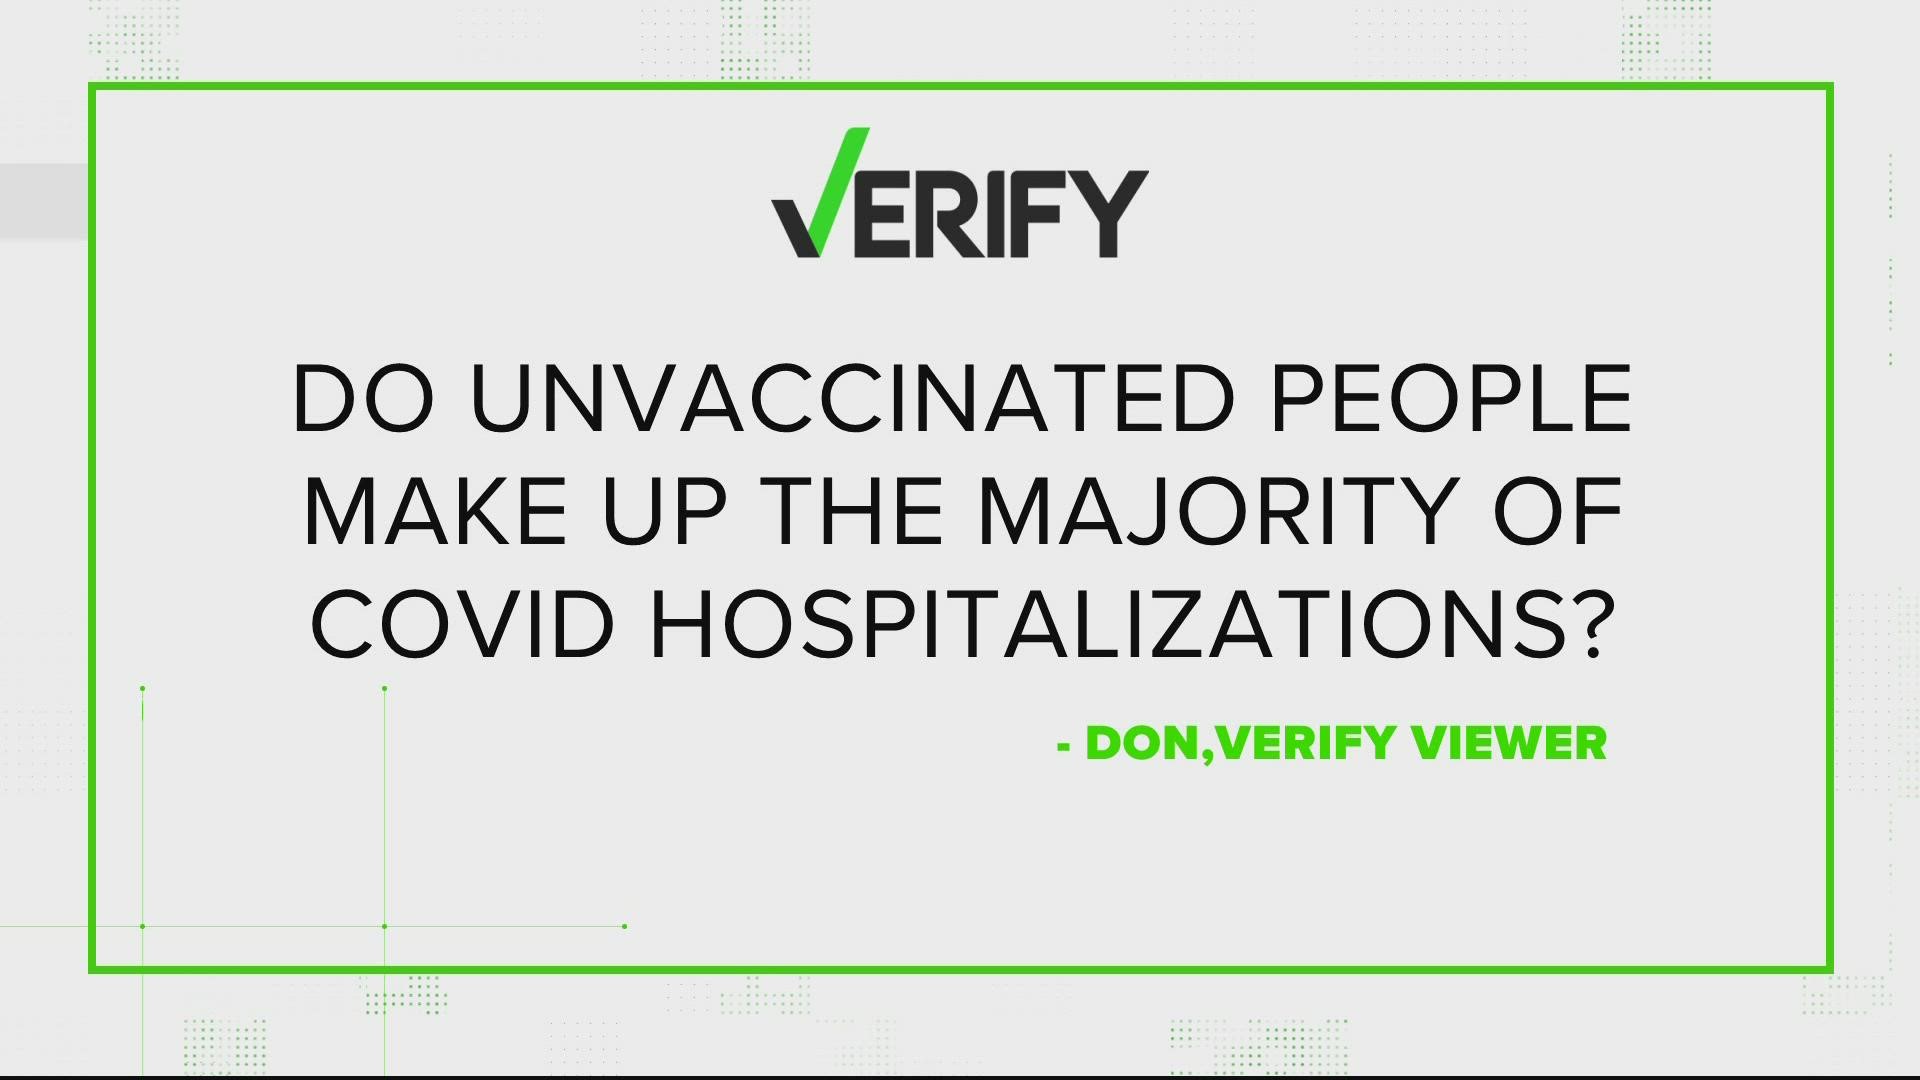 Our Verify researchers looked at national and local hospitalization statistics to find out if the pandemic is really a "crisis of the unvaccinated."